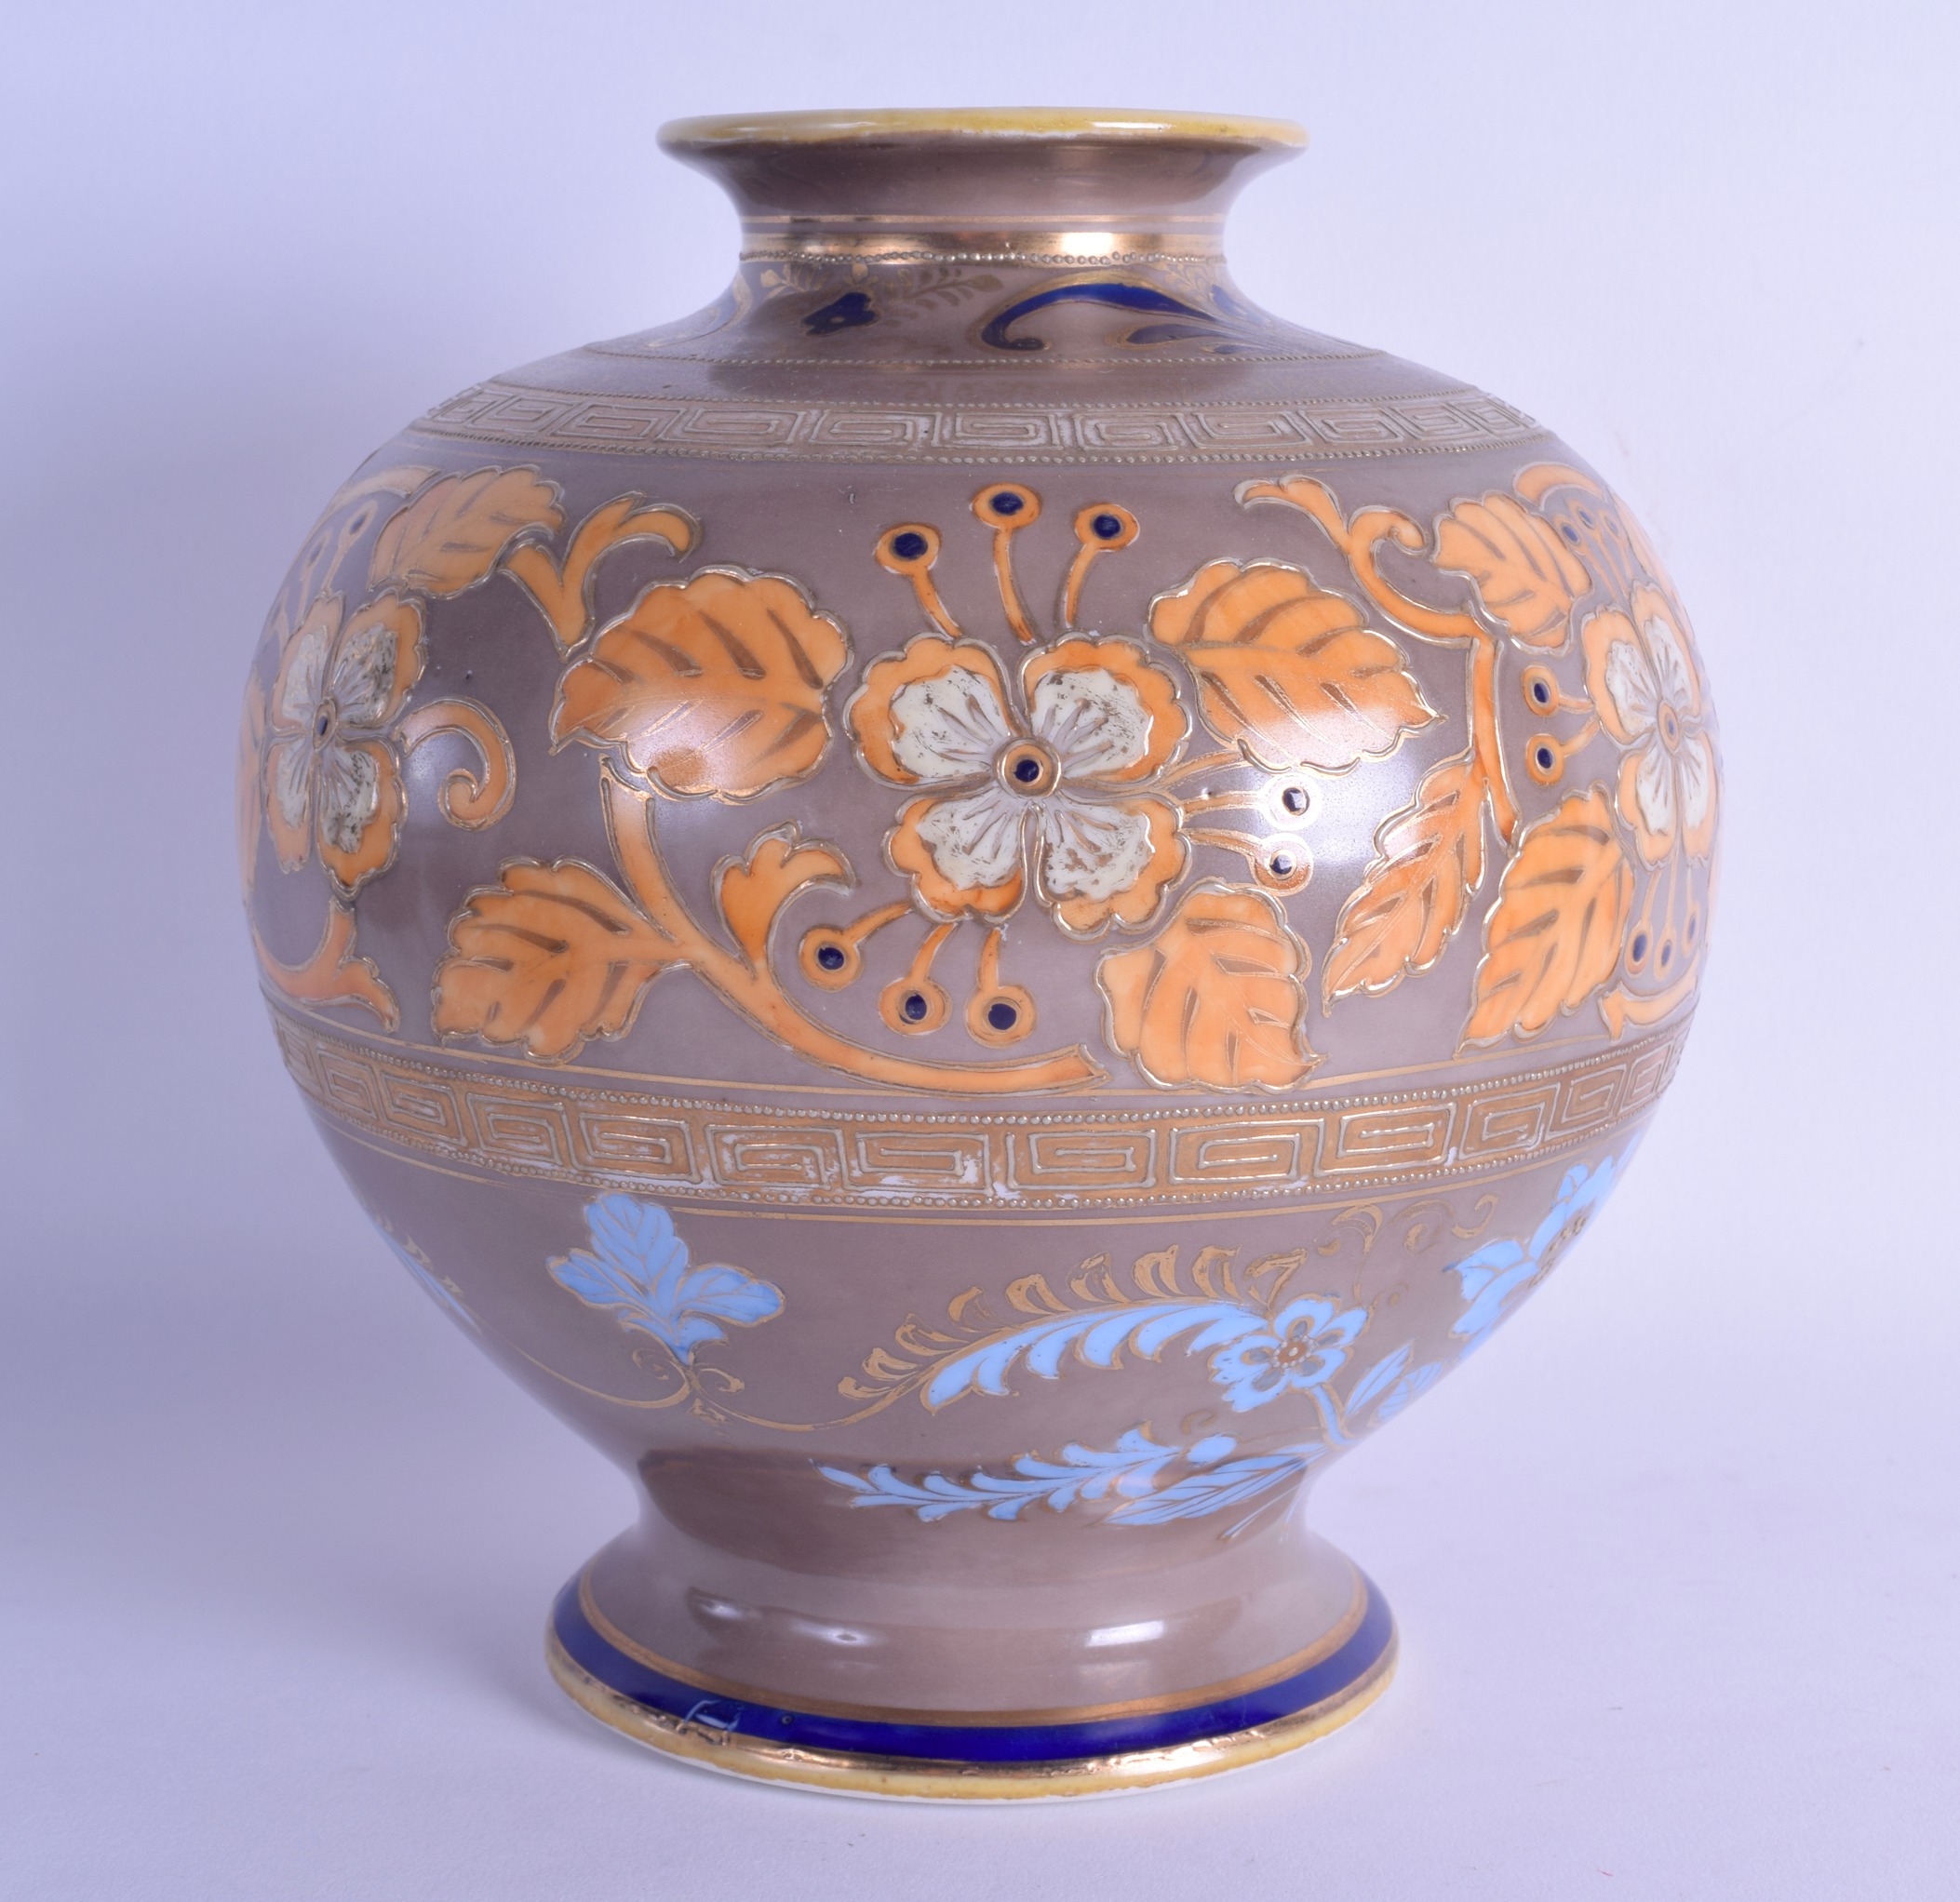 20th c. Noritake vase with two Greek key borders and orange plants highlighted in gold. 18cm high